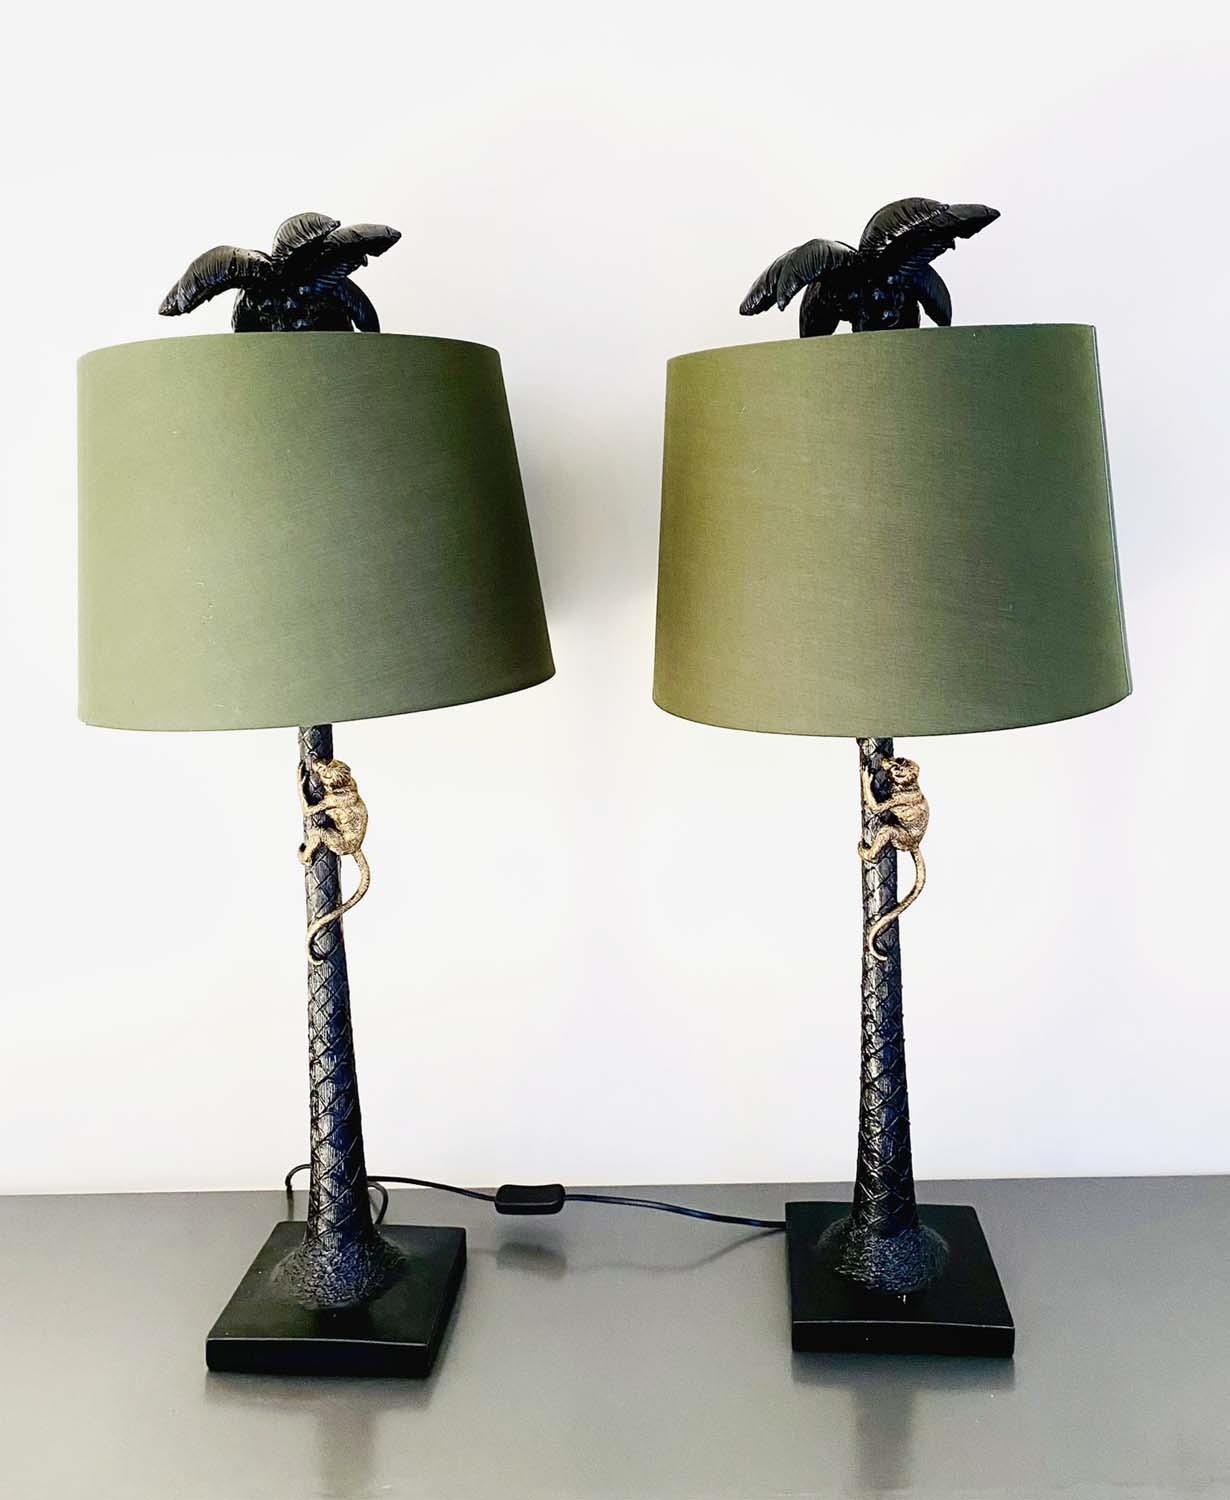 TABLE LAMPS, a pair, with shades, 86cm H, bases in the form of palm trees with a climbing monkey. (